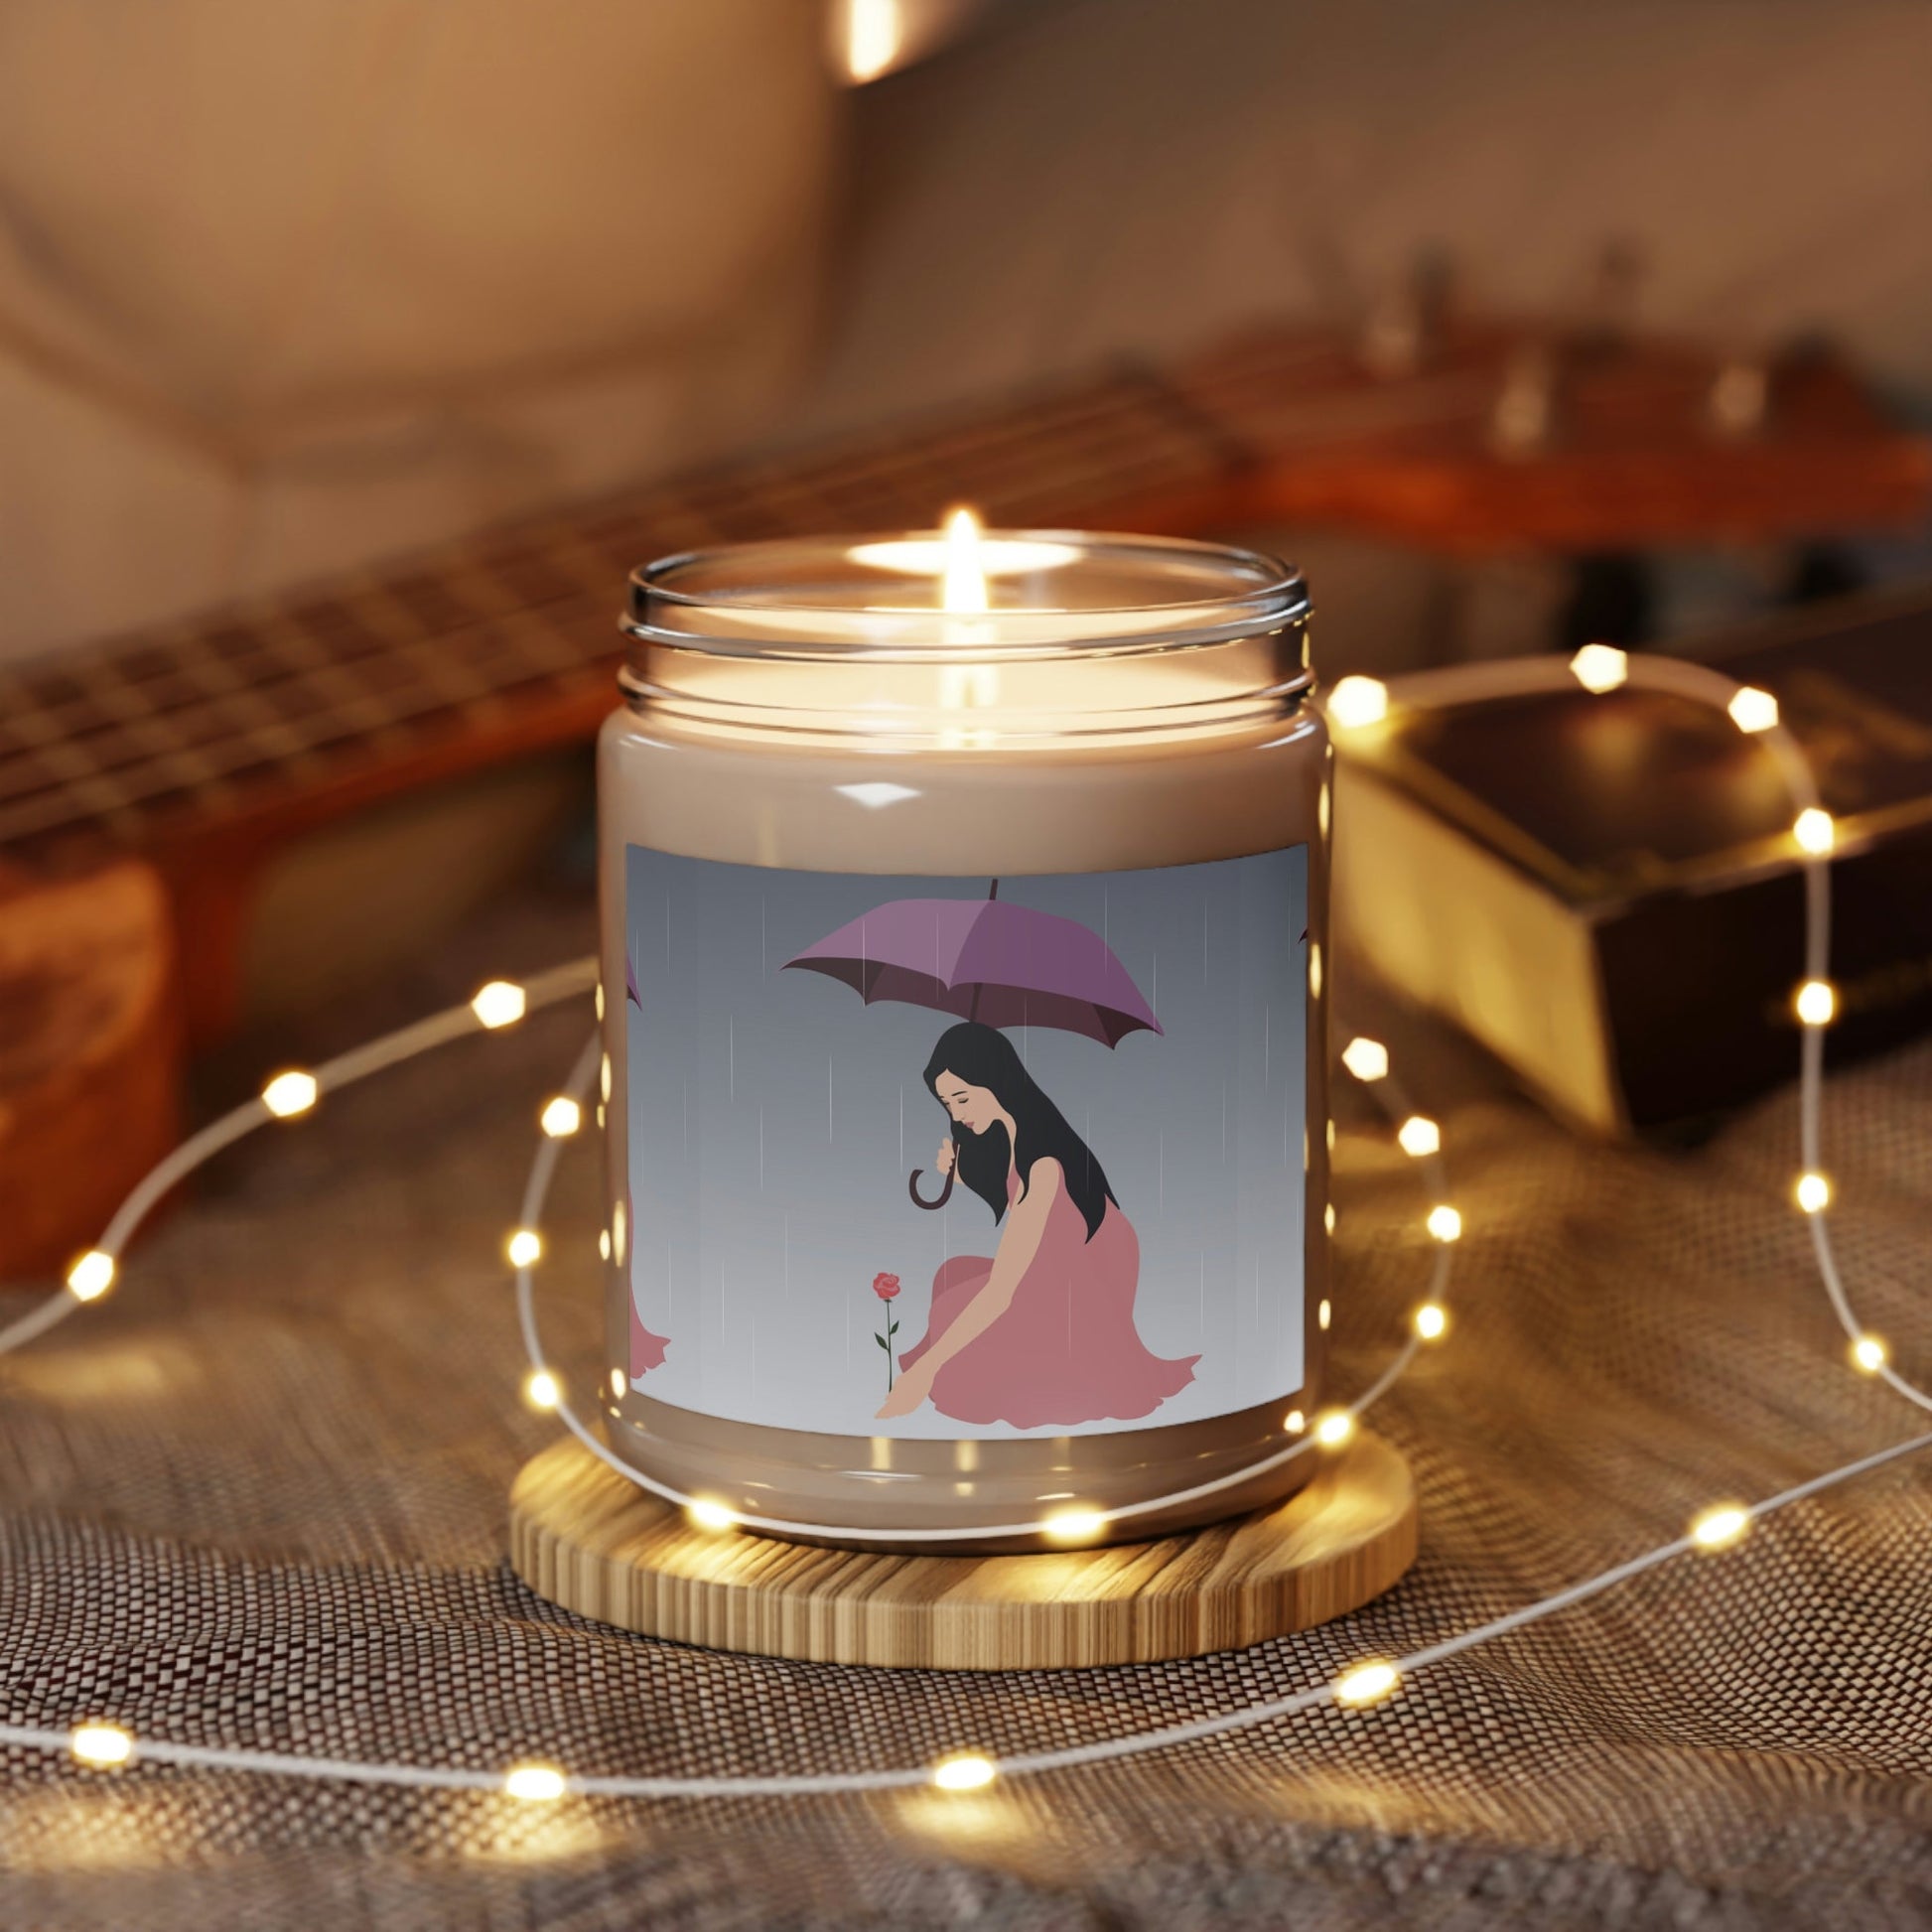 Woman with Umbrella Cartoon Art Walking in the Rain Graphic Scented Candle Up to 60hSoy Wax 9oz Ichaku [Perfect Gifts Selection]